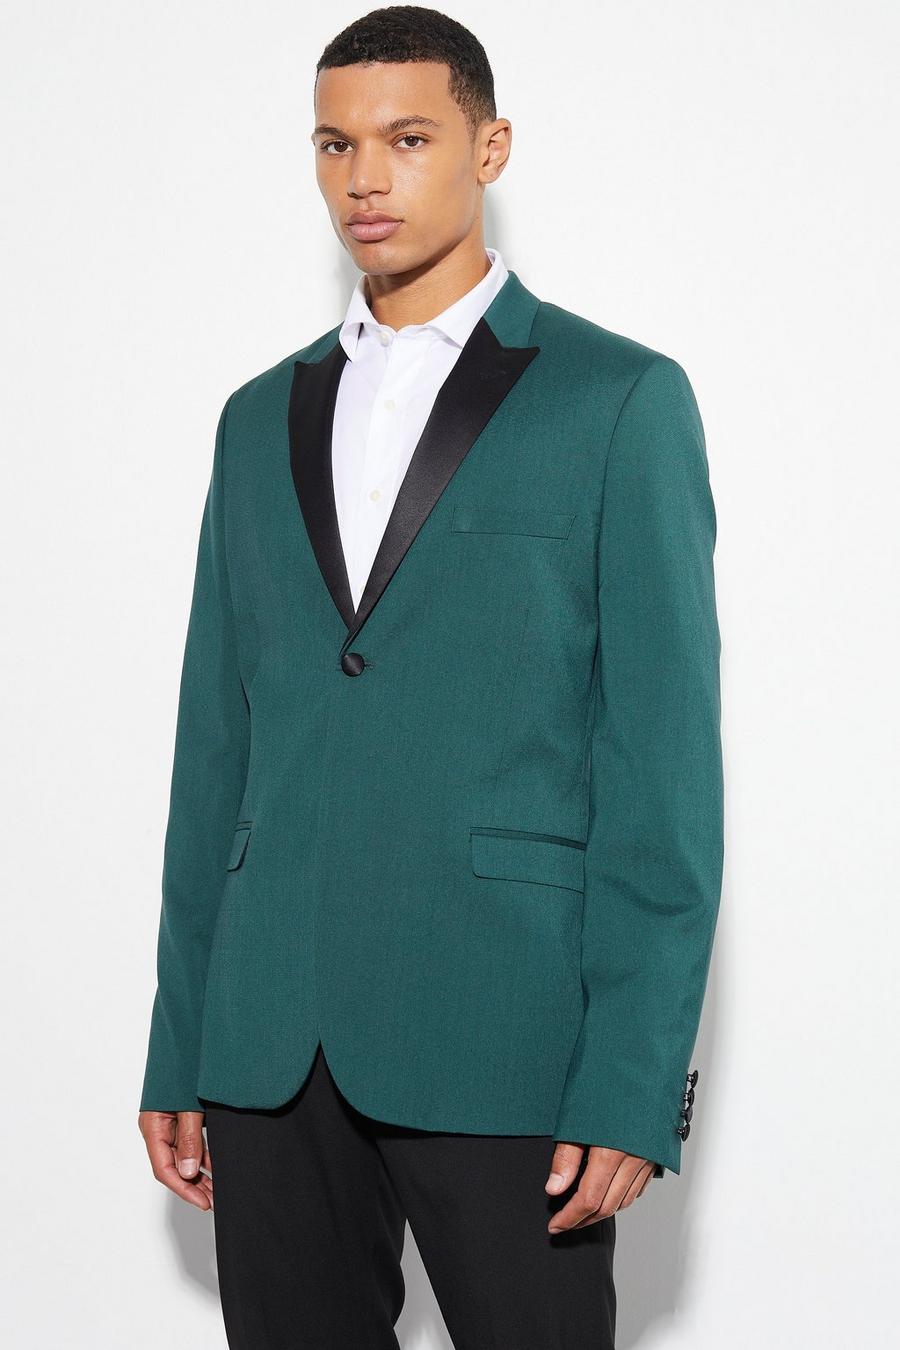 Forest green Tall Skinny Tuxedo Single Breasted Suit Jacket